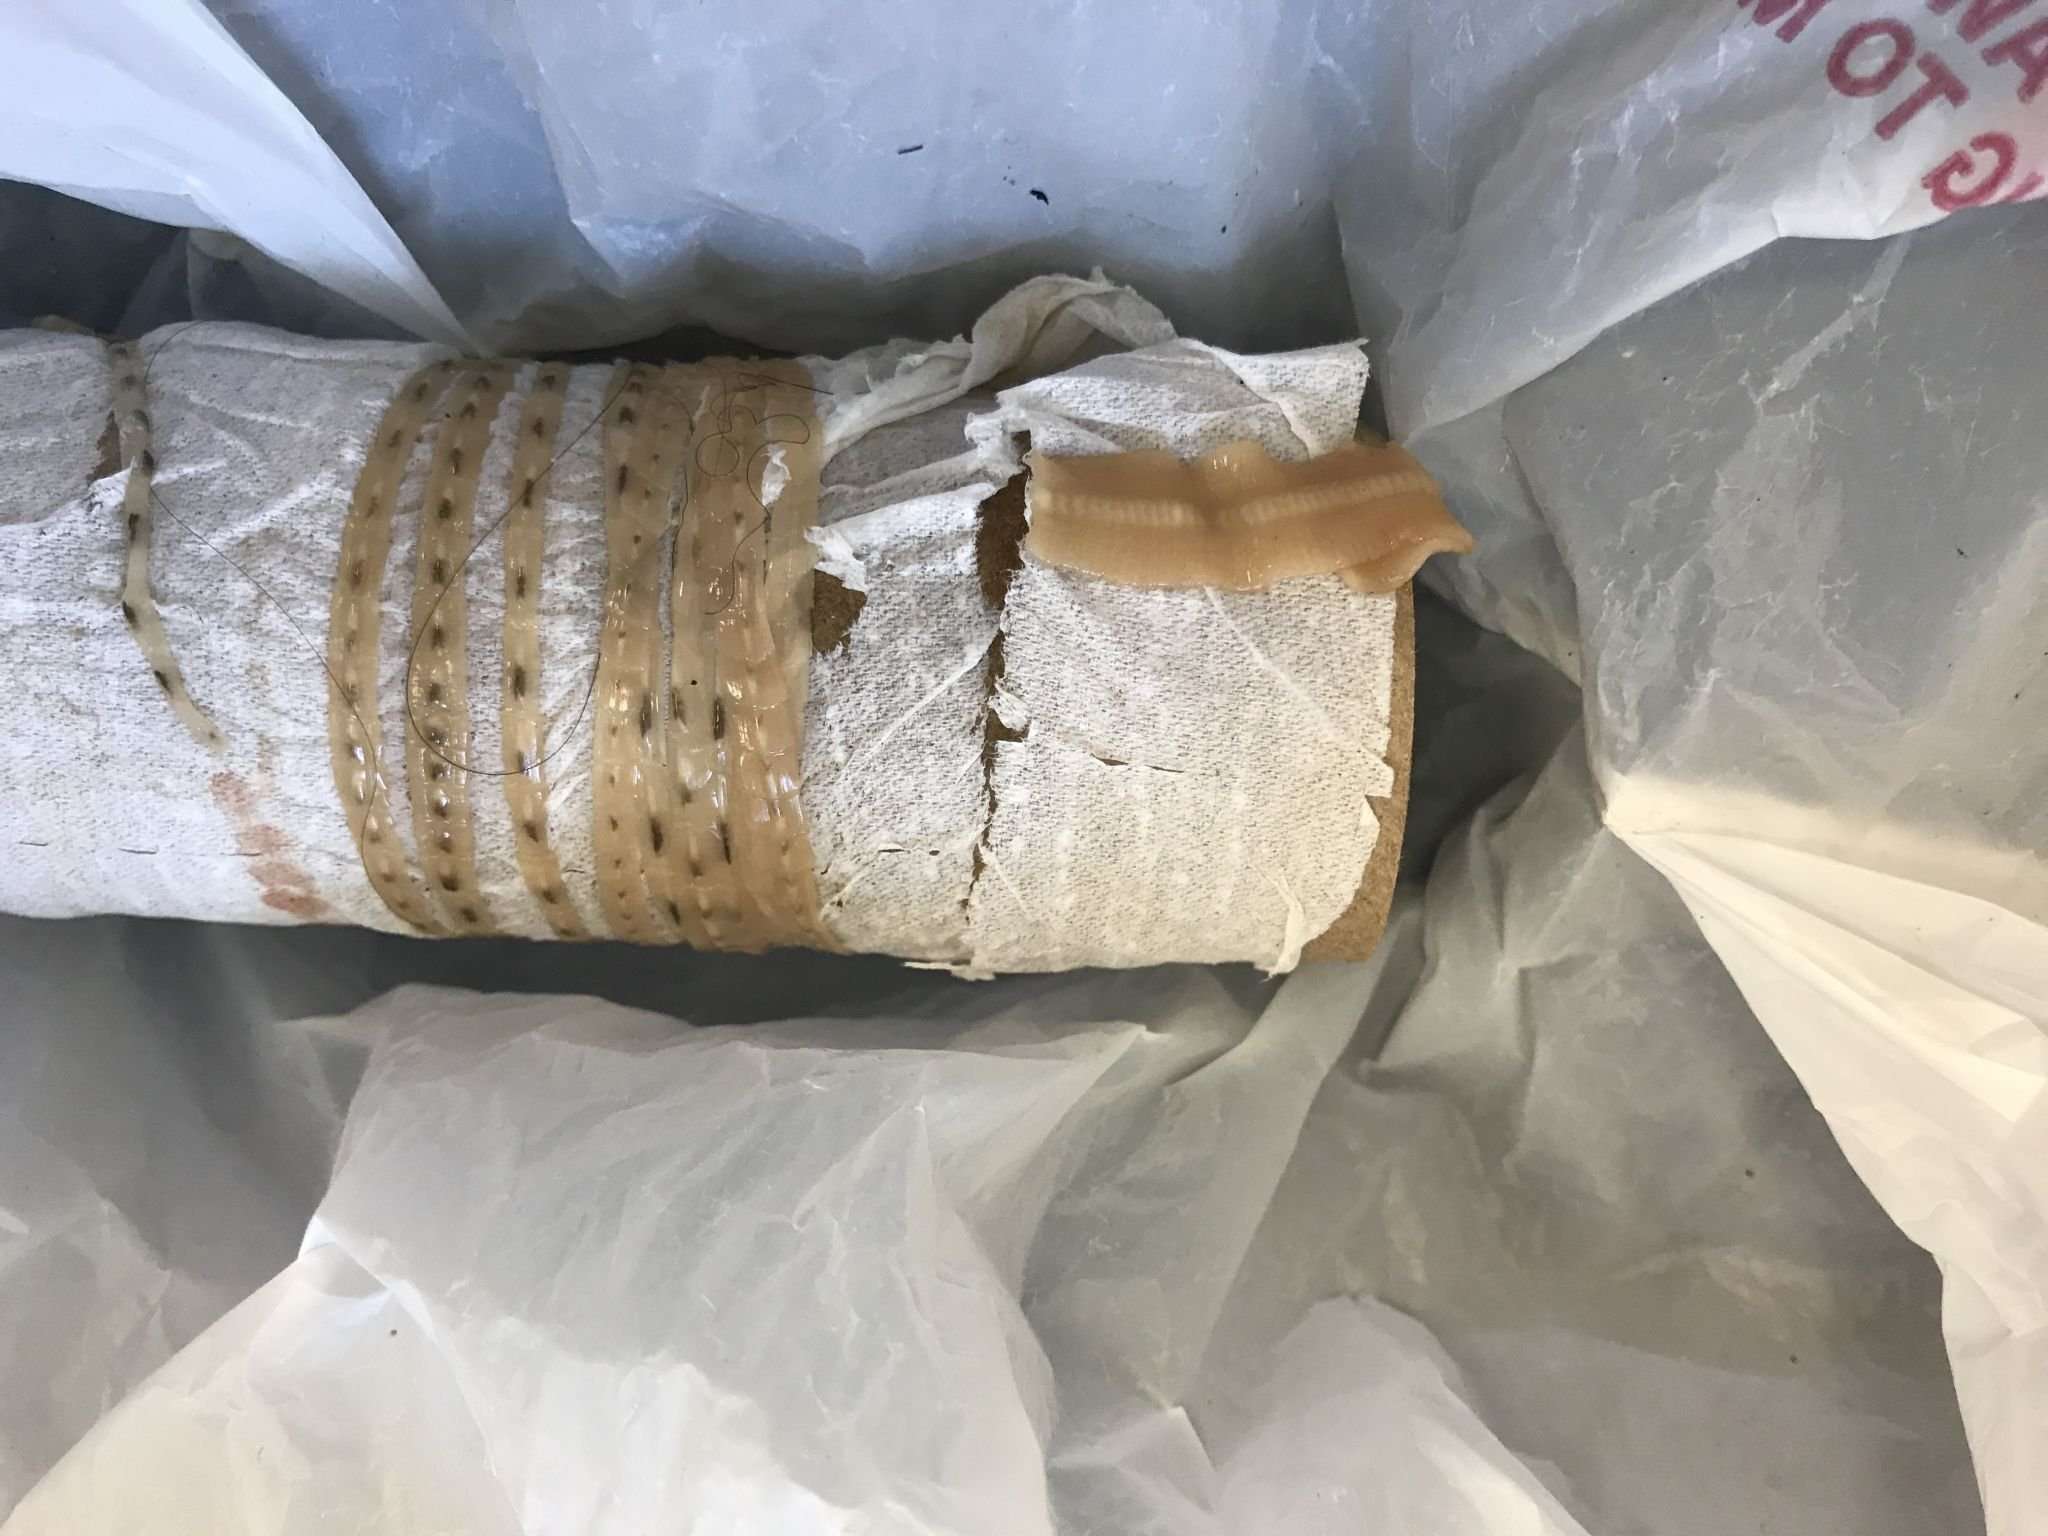 image for Sushi lover pulled a 5-foot tapeworm from intestine, Fresno doc says